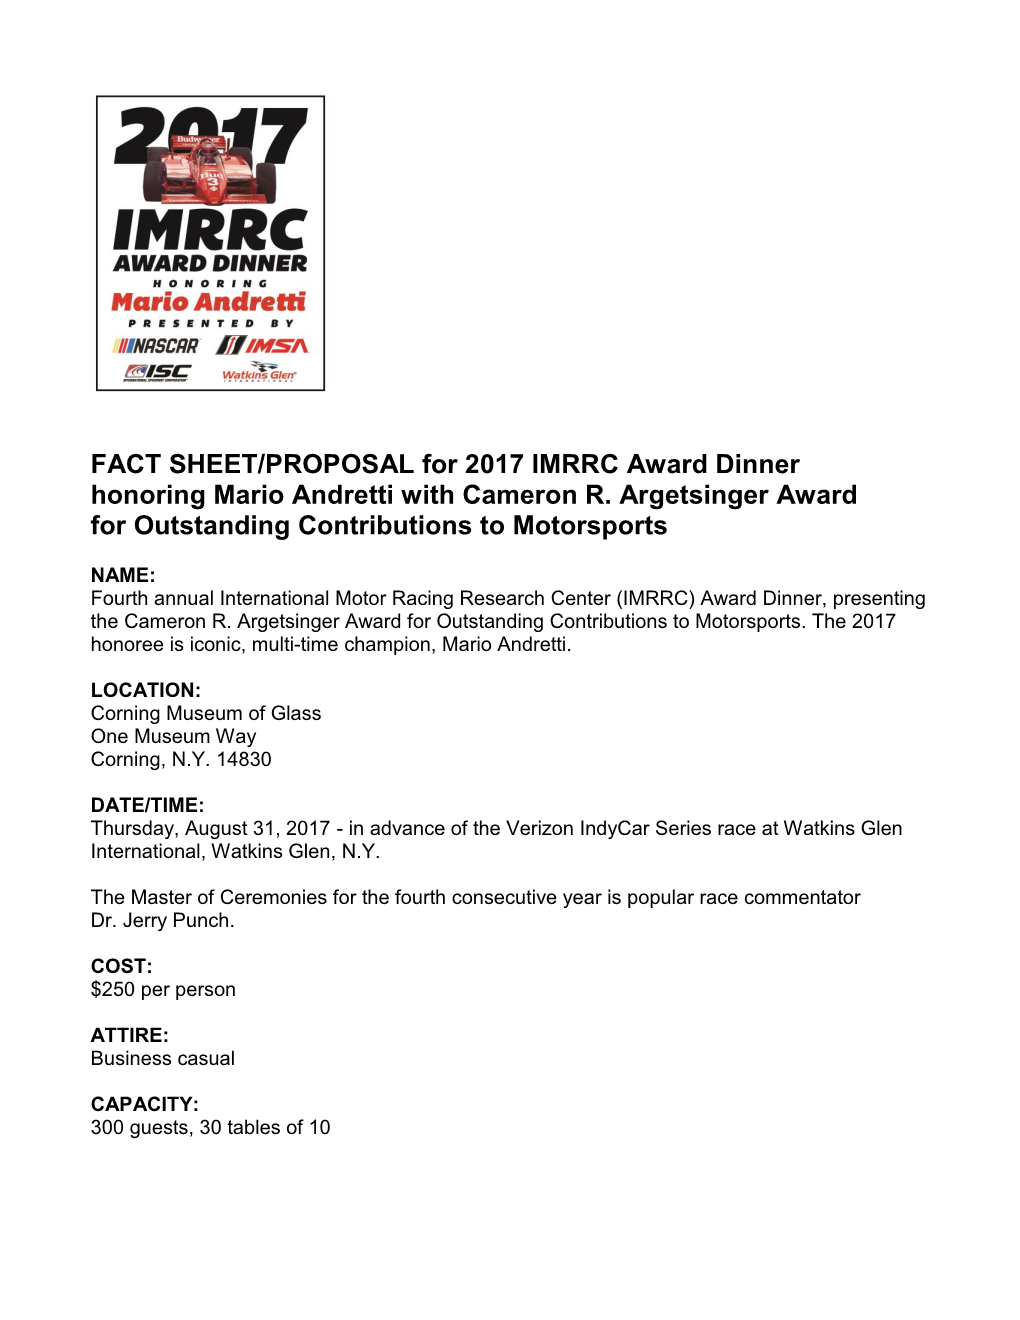 FACT SHEET/PROPOSAL for 2017 IMRRC Award Dinner Honoring Mario Andretti with Cameron R